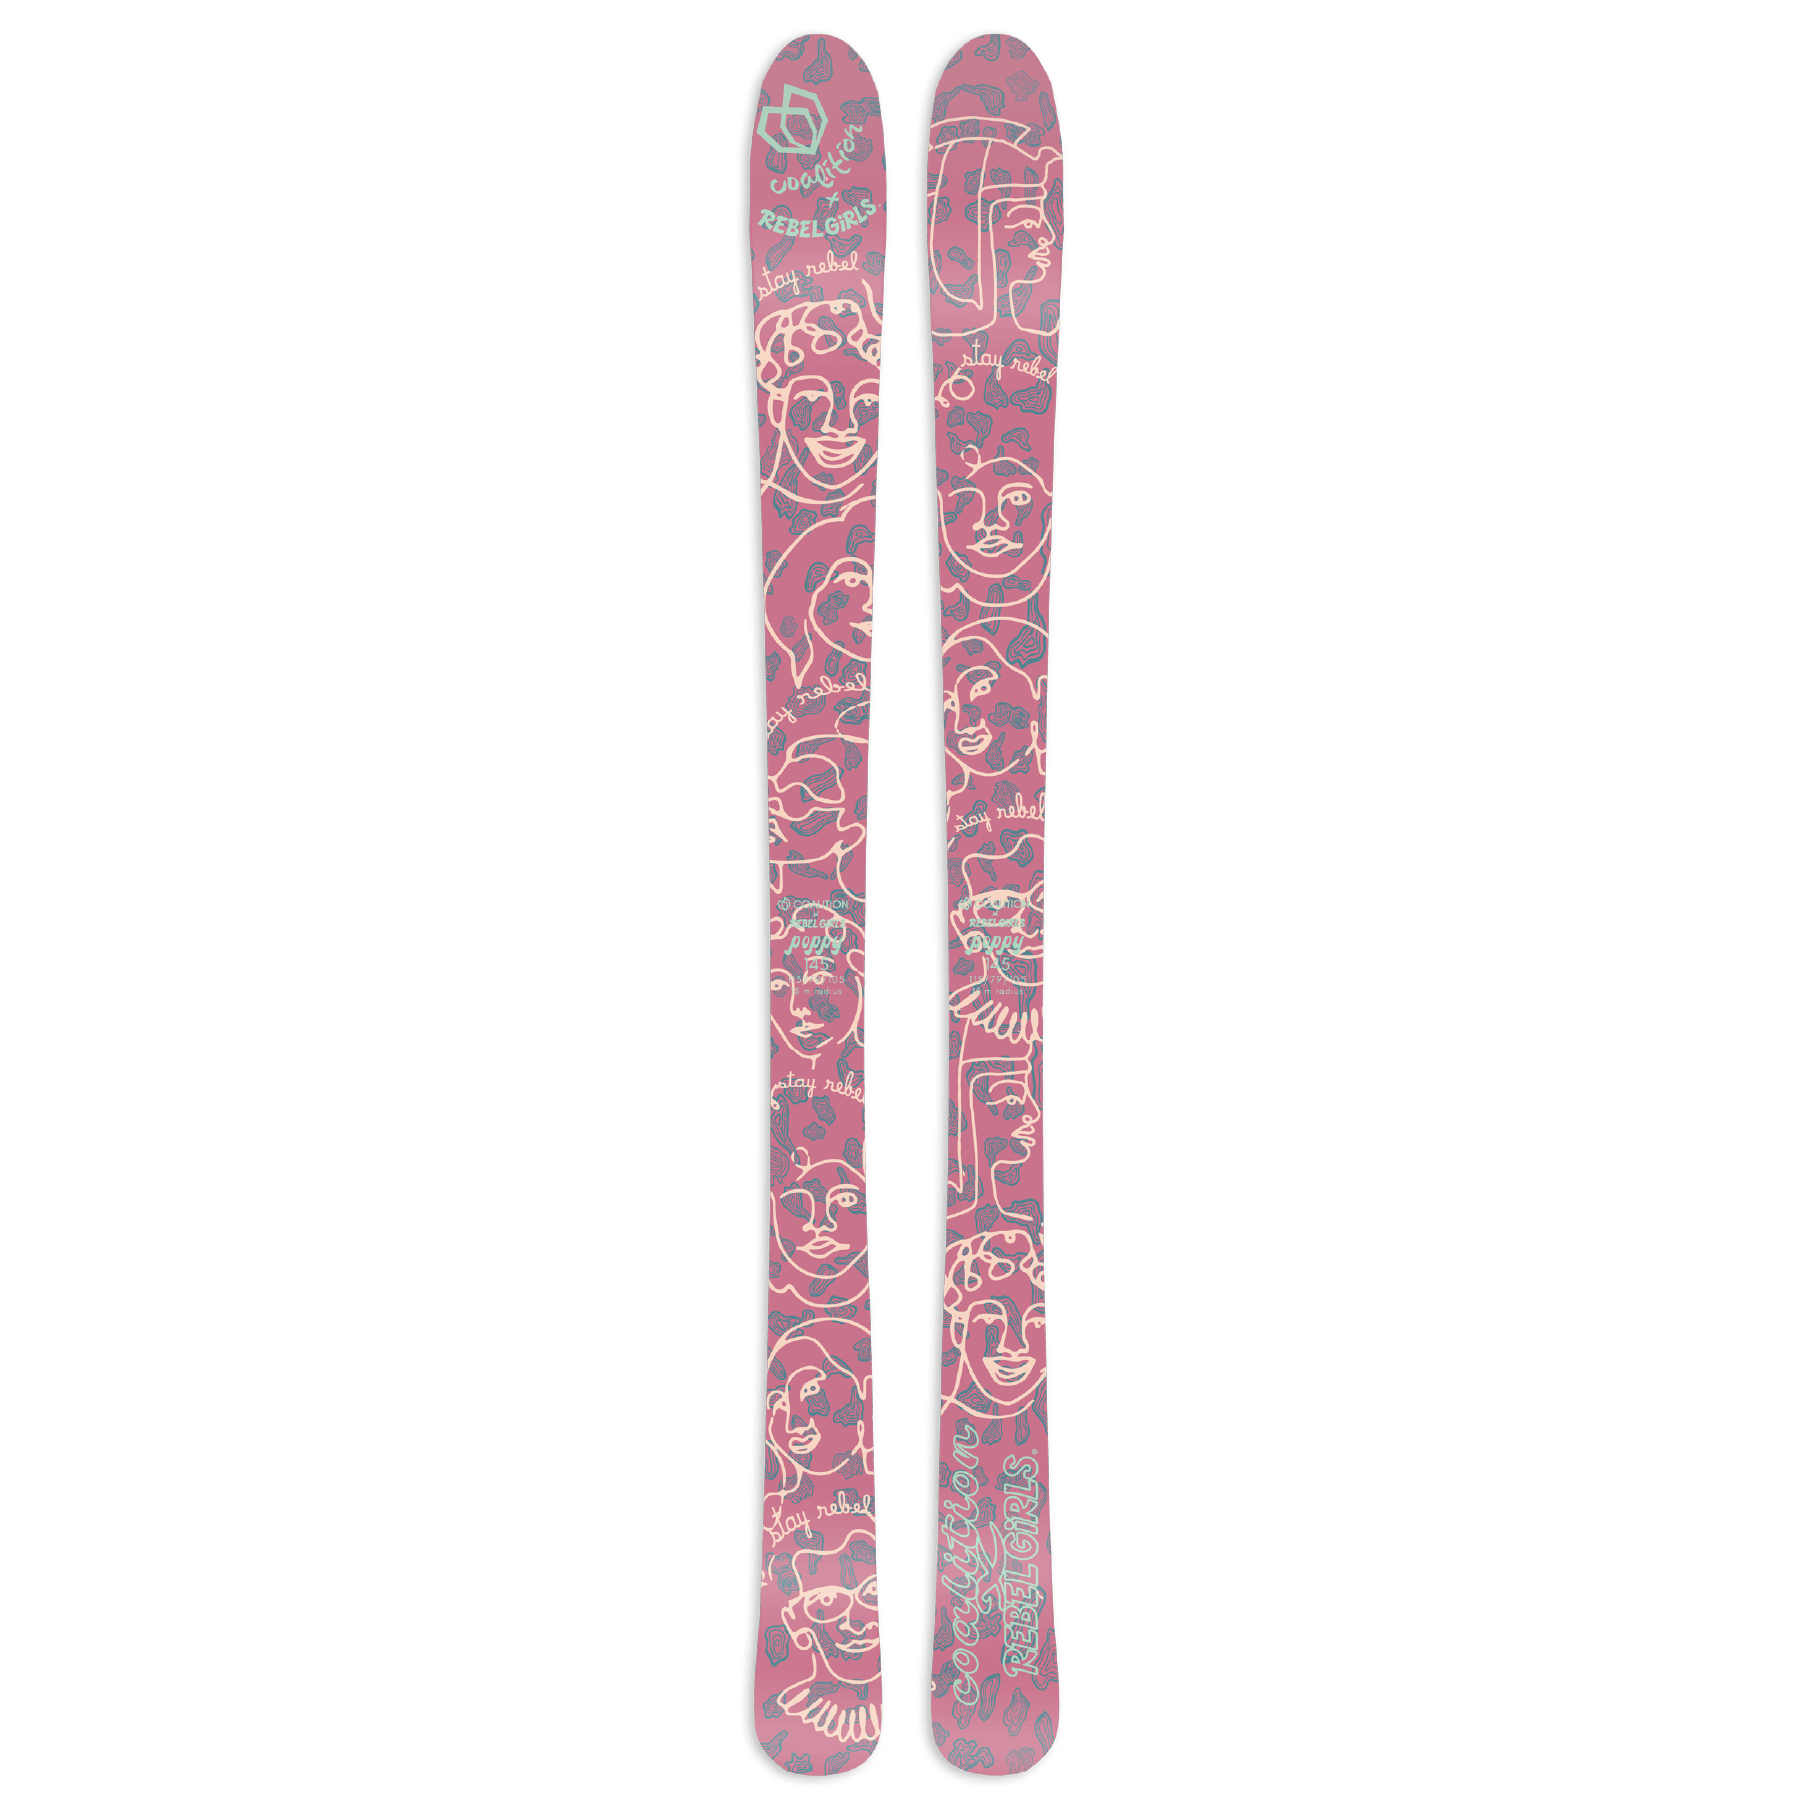 Sold out: &#8220;Poppy&#8221; Youth Ski by Coalition Snow